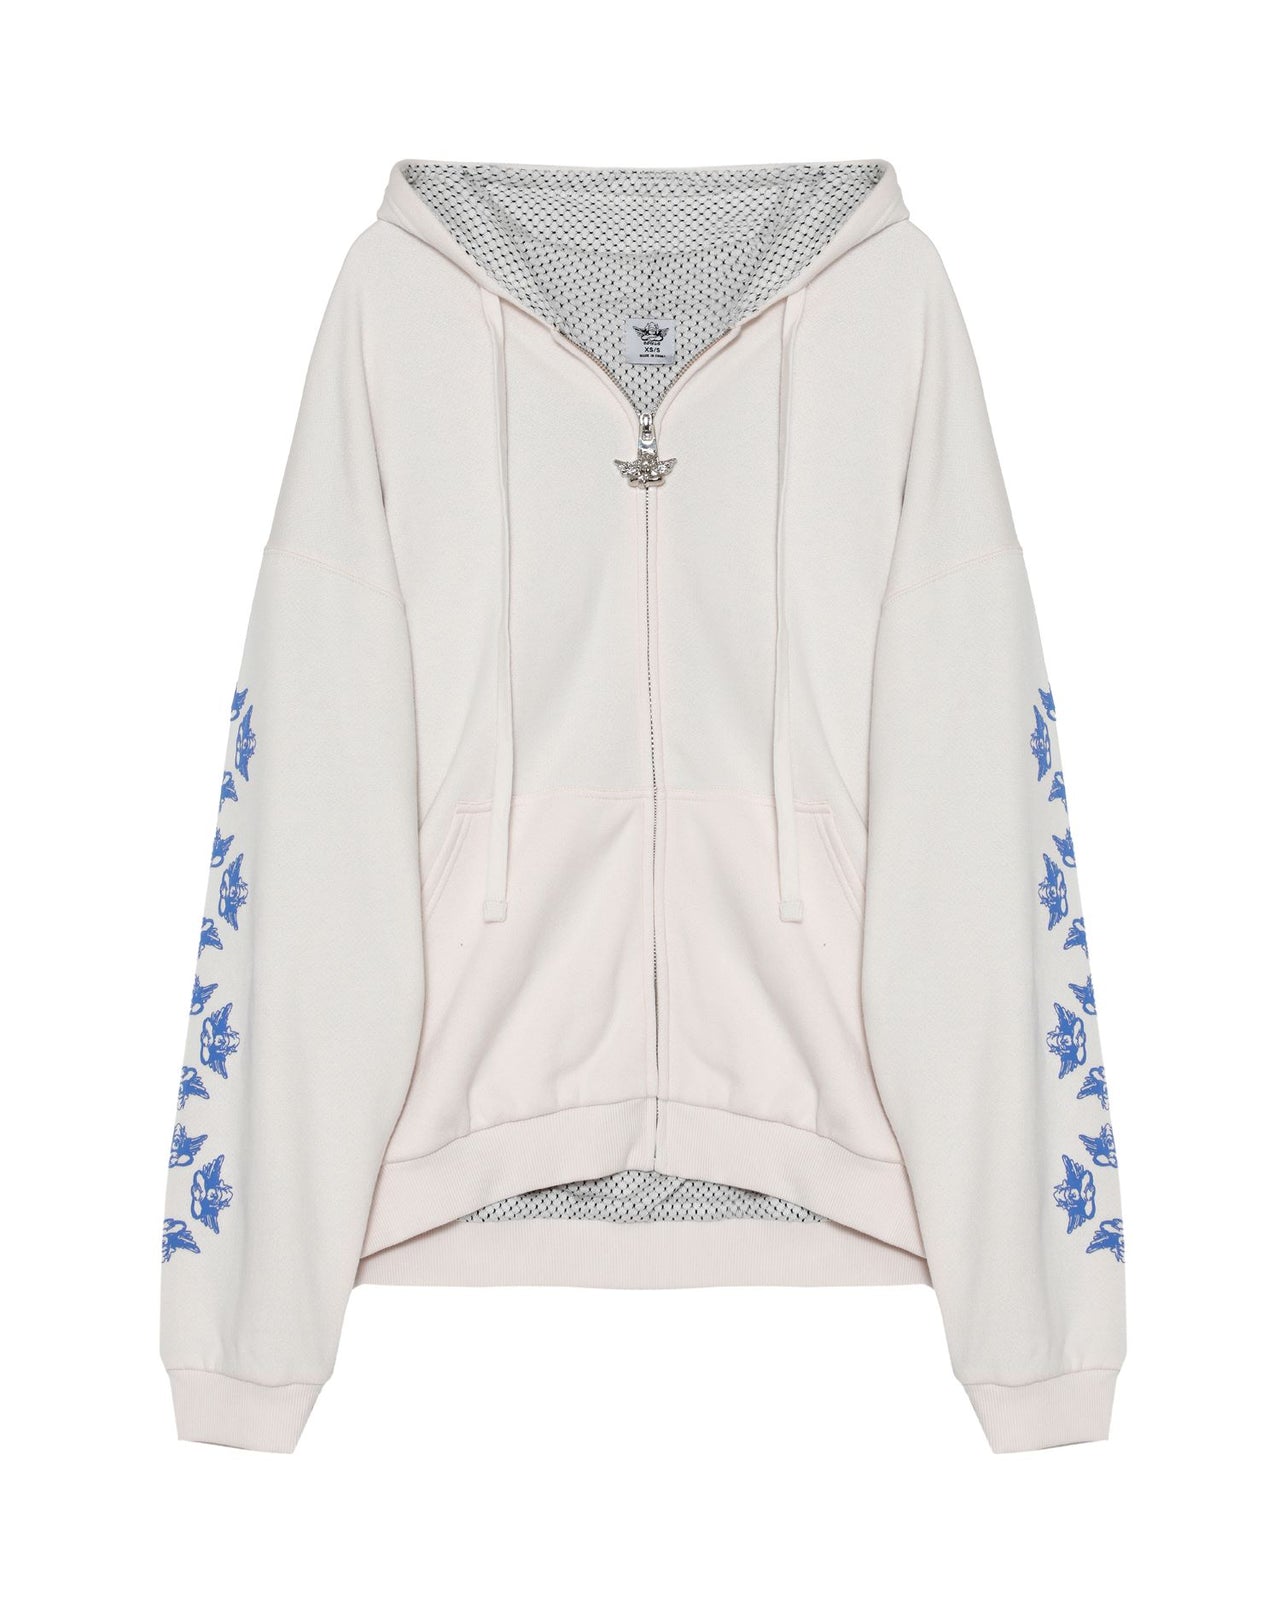 Yours Truly Harley Hoodie Sand, Sweat Lounge by Boys Lie | LIT Boutique